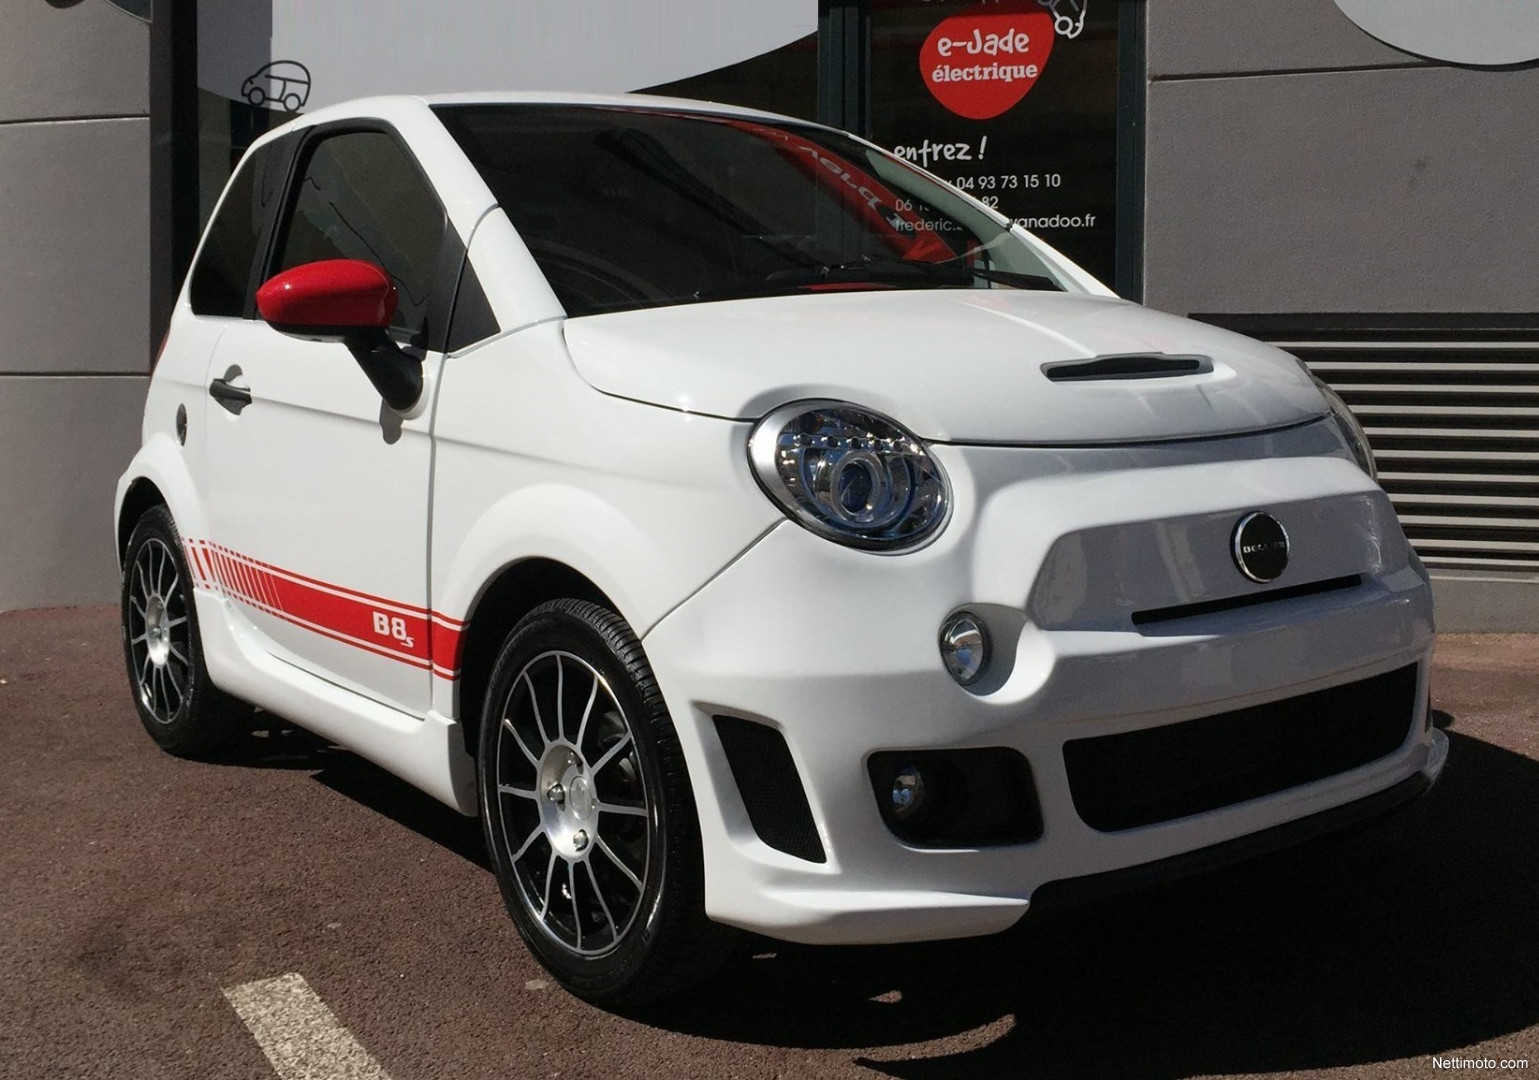 bellier-b8-is-a-smaller-fiat-500-clone-for-teens-even-has-abarth-and-cabrio-130498_1